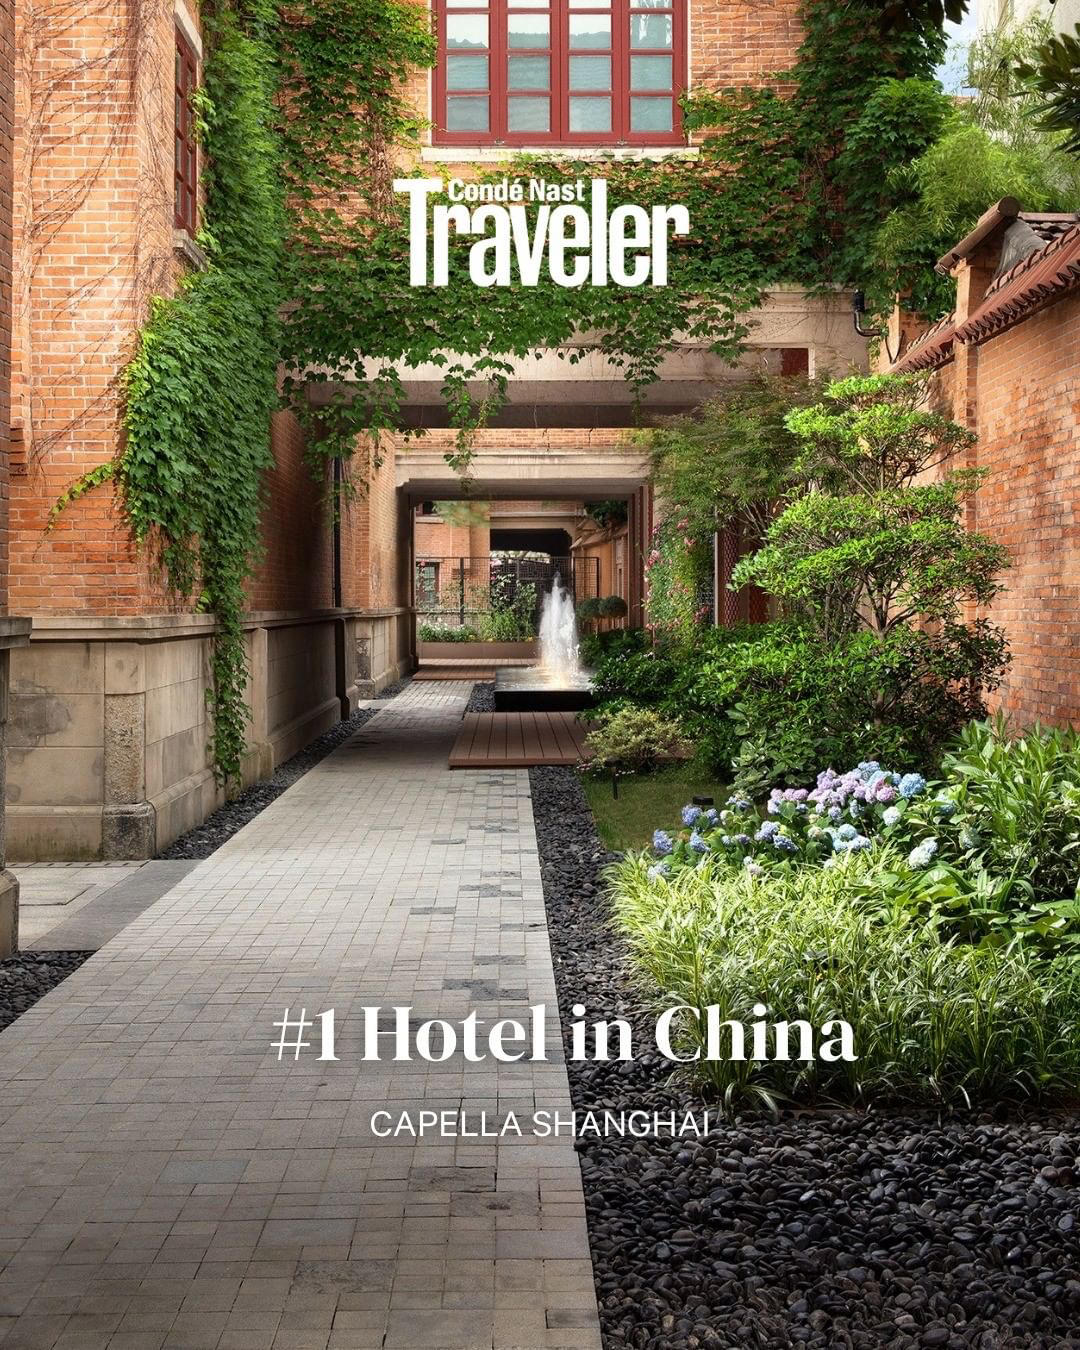 Capella Shanghai - We are thrilled to share that Capella Shanghai has been named the #1 Hotel in Chi